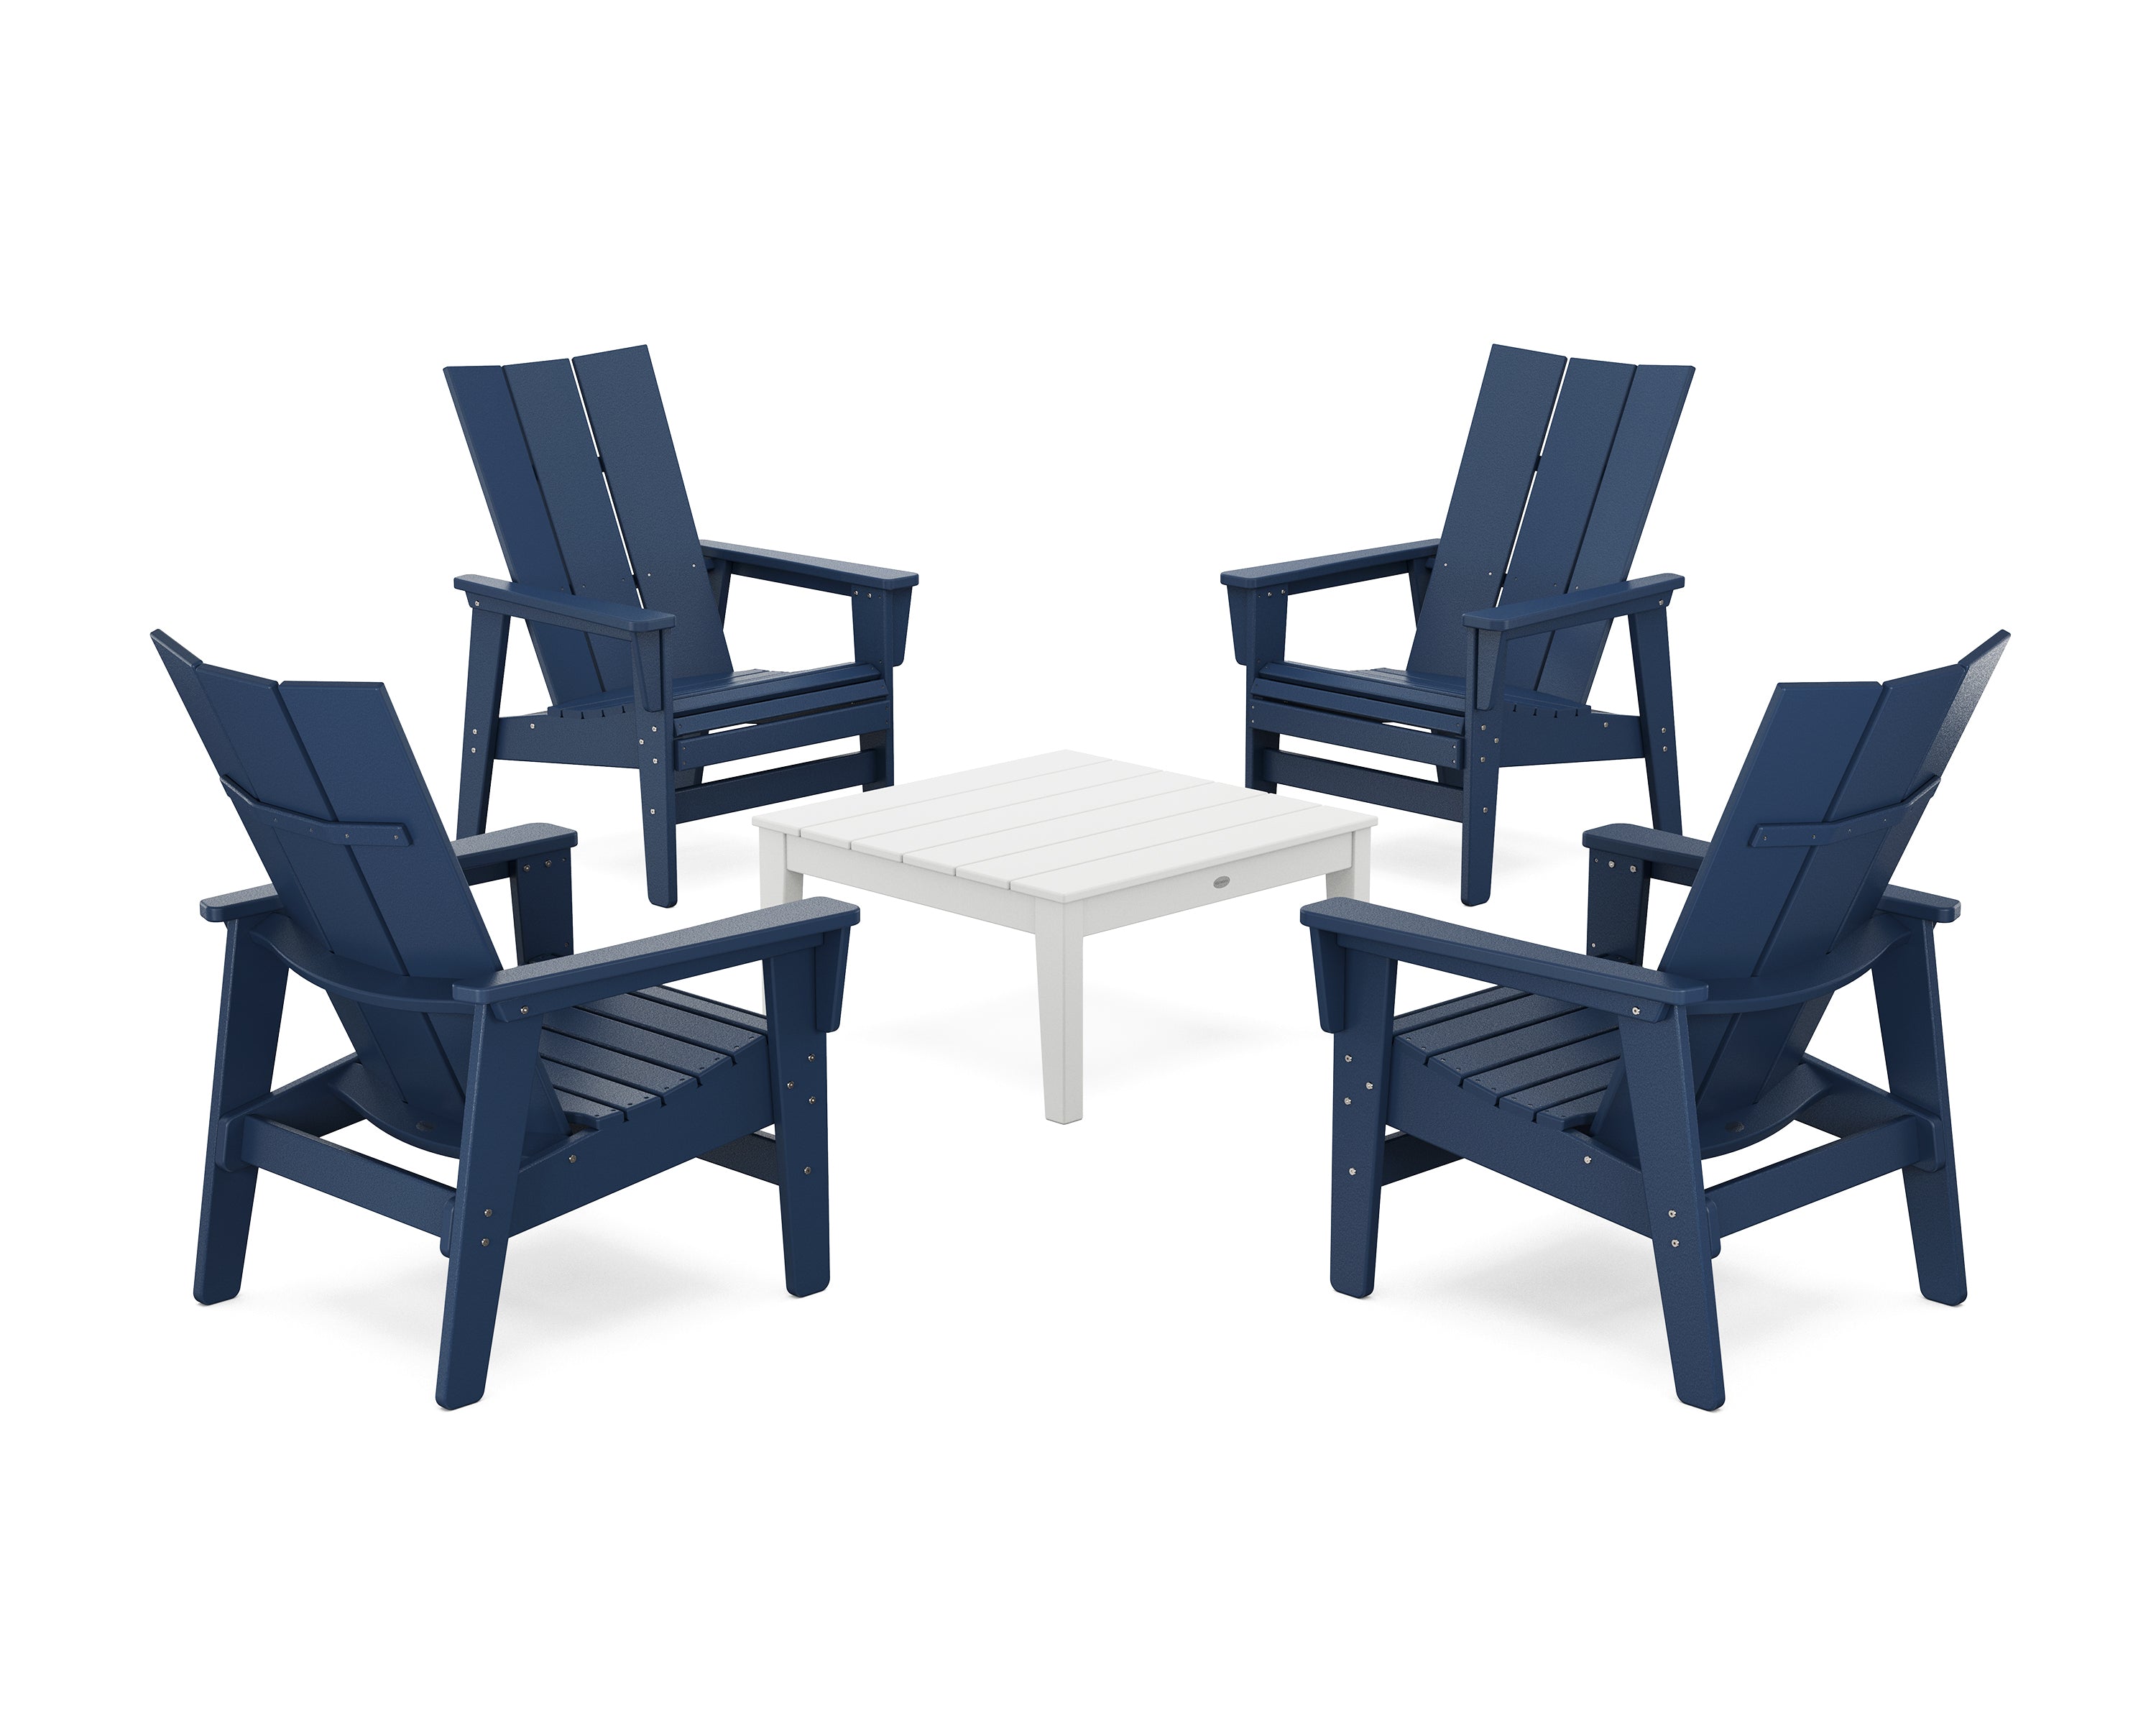 POLYWOOD® 5-Piece Modern Grand Upright Adirondack Chair Conversation Group in Navy / White